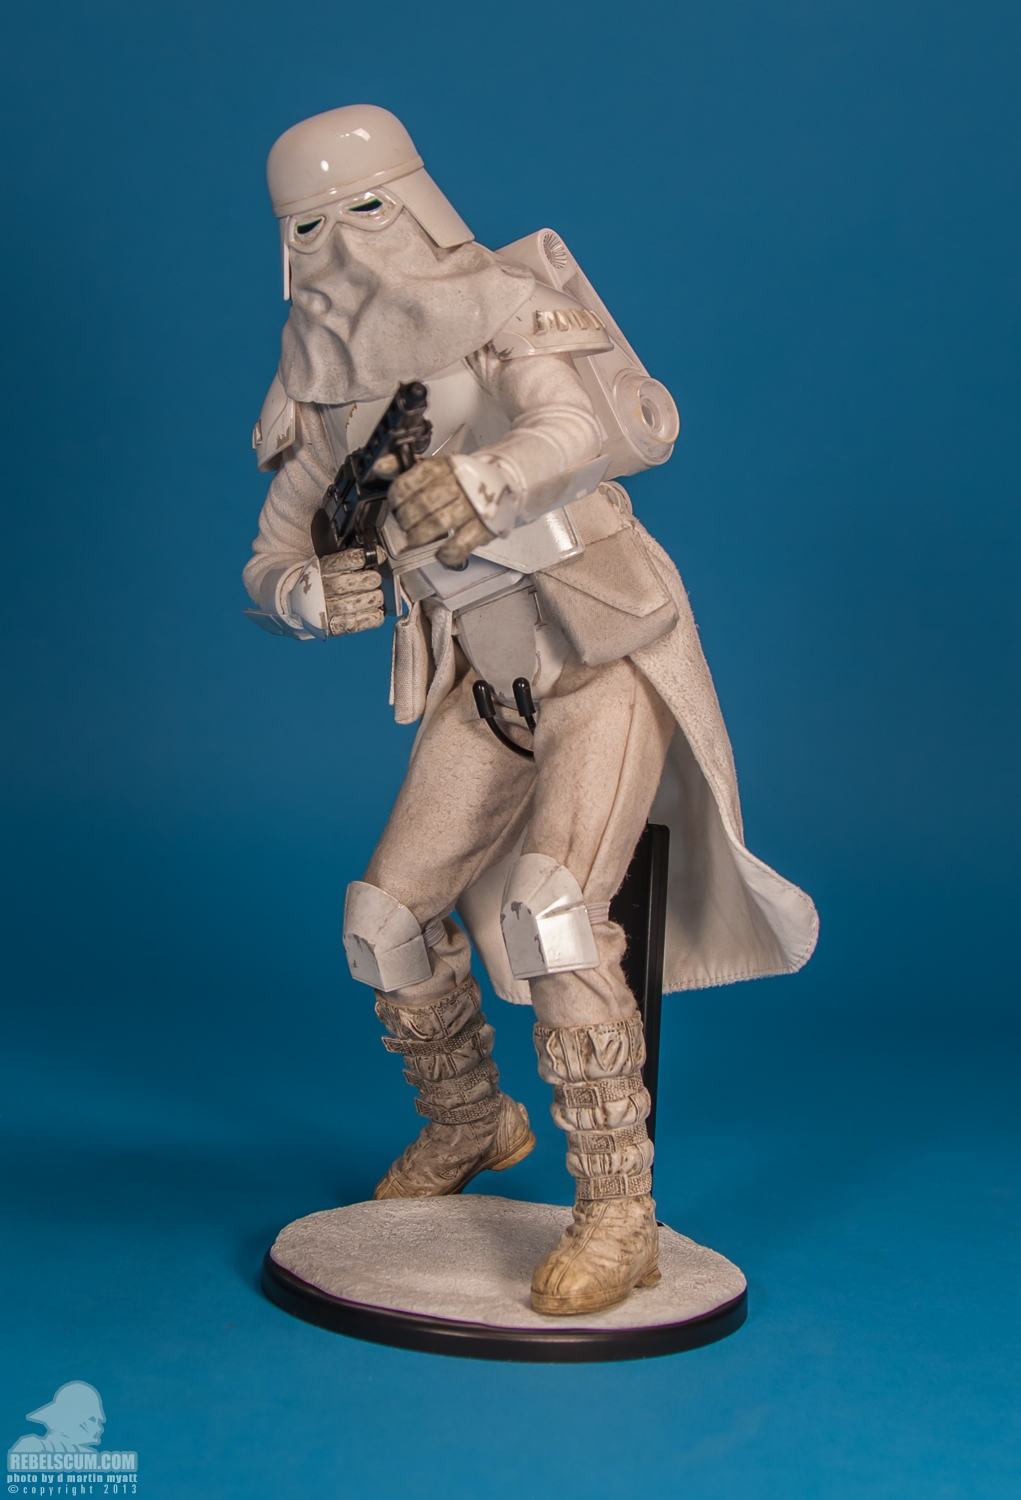 Snowtrooper_Militaries_Of_Star_Wars_Sideshow_Collectibles-13.jpg